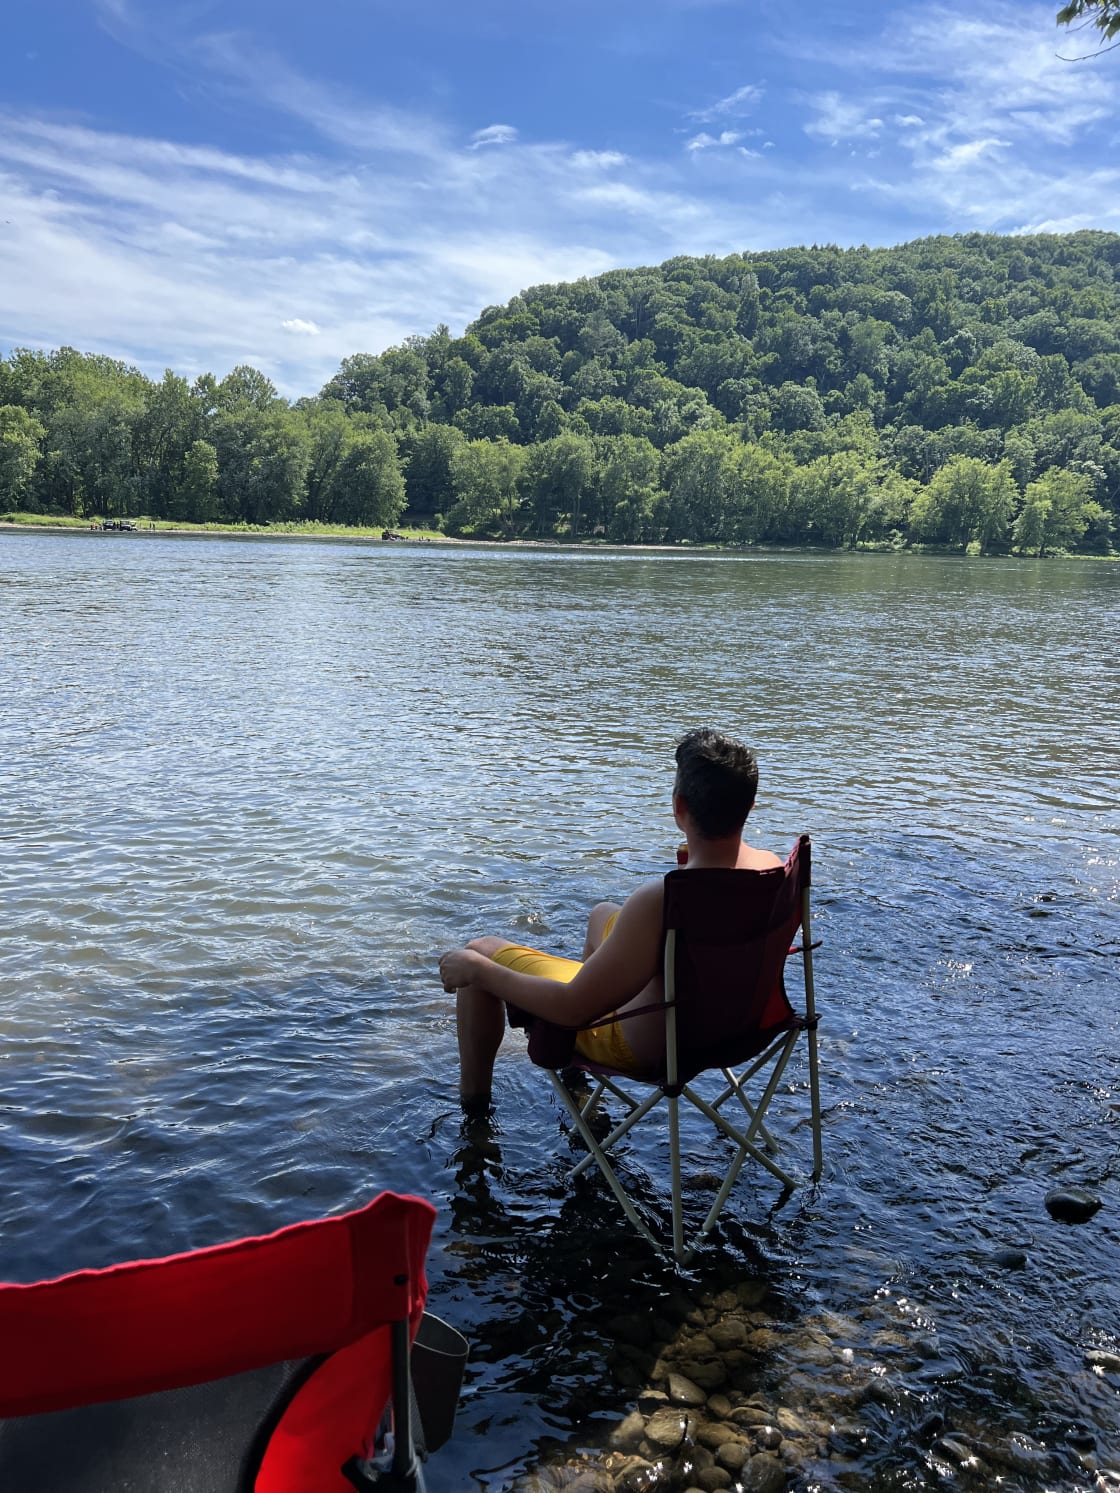 The locals know the best way to enjoy the river is to plop your chair down in the water and watch the boats go by.